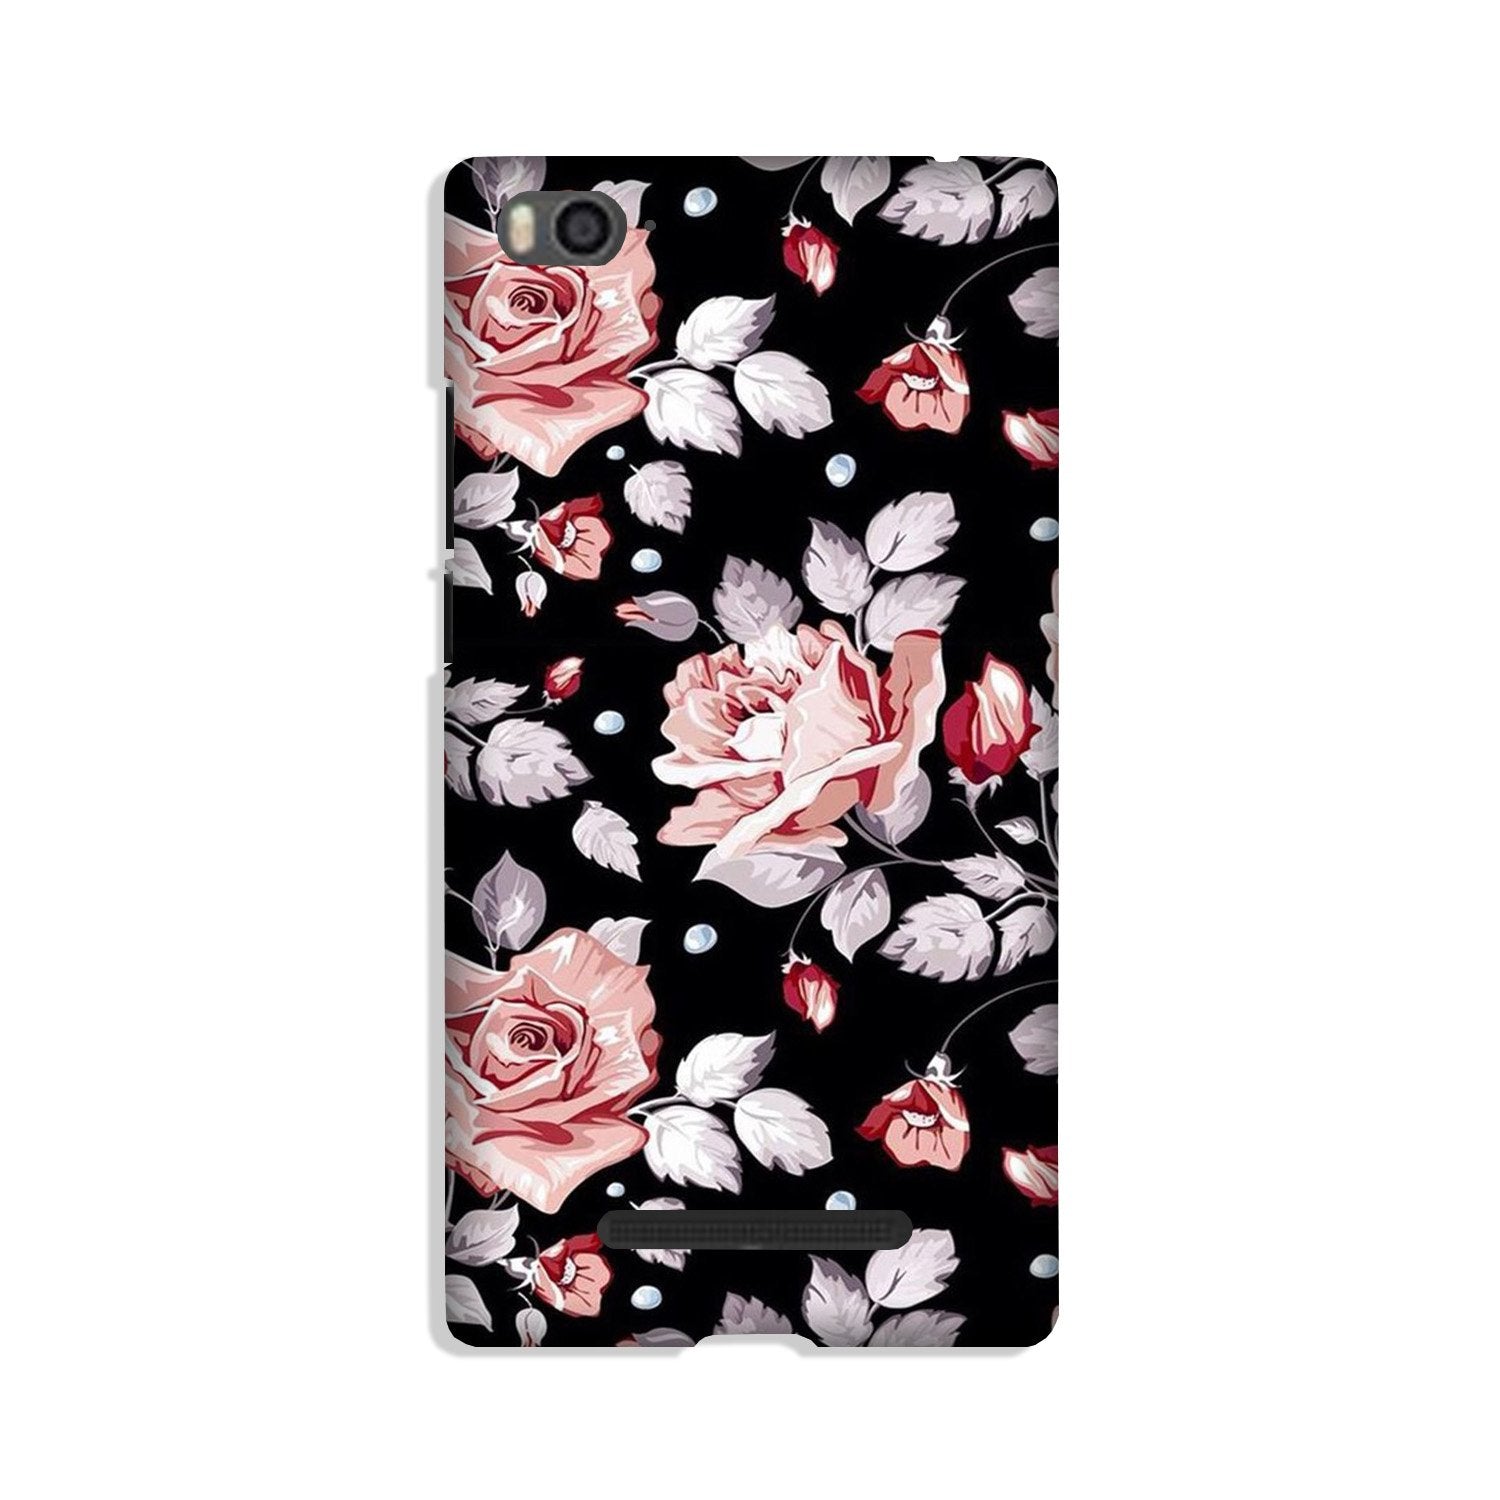 Pink rose Case for Redmi 4A